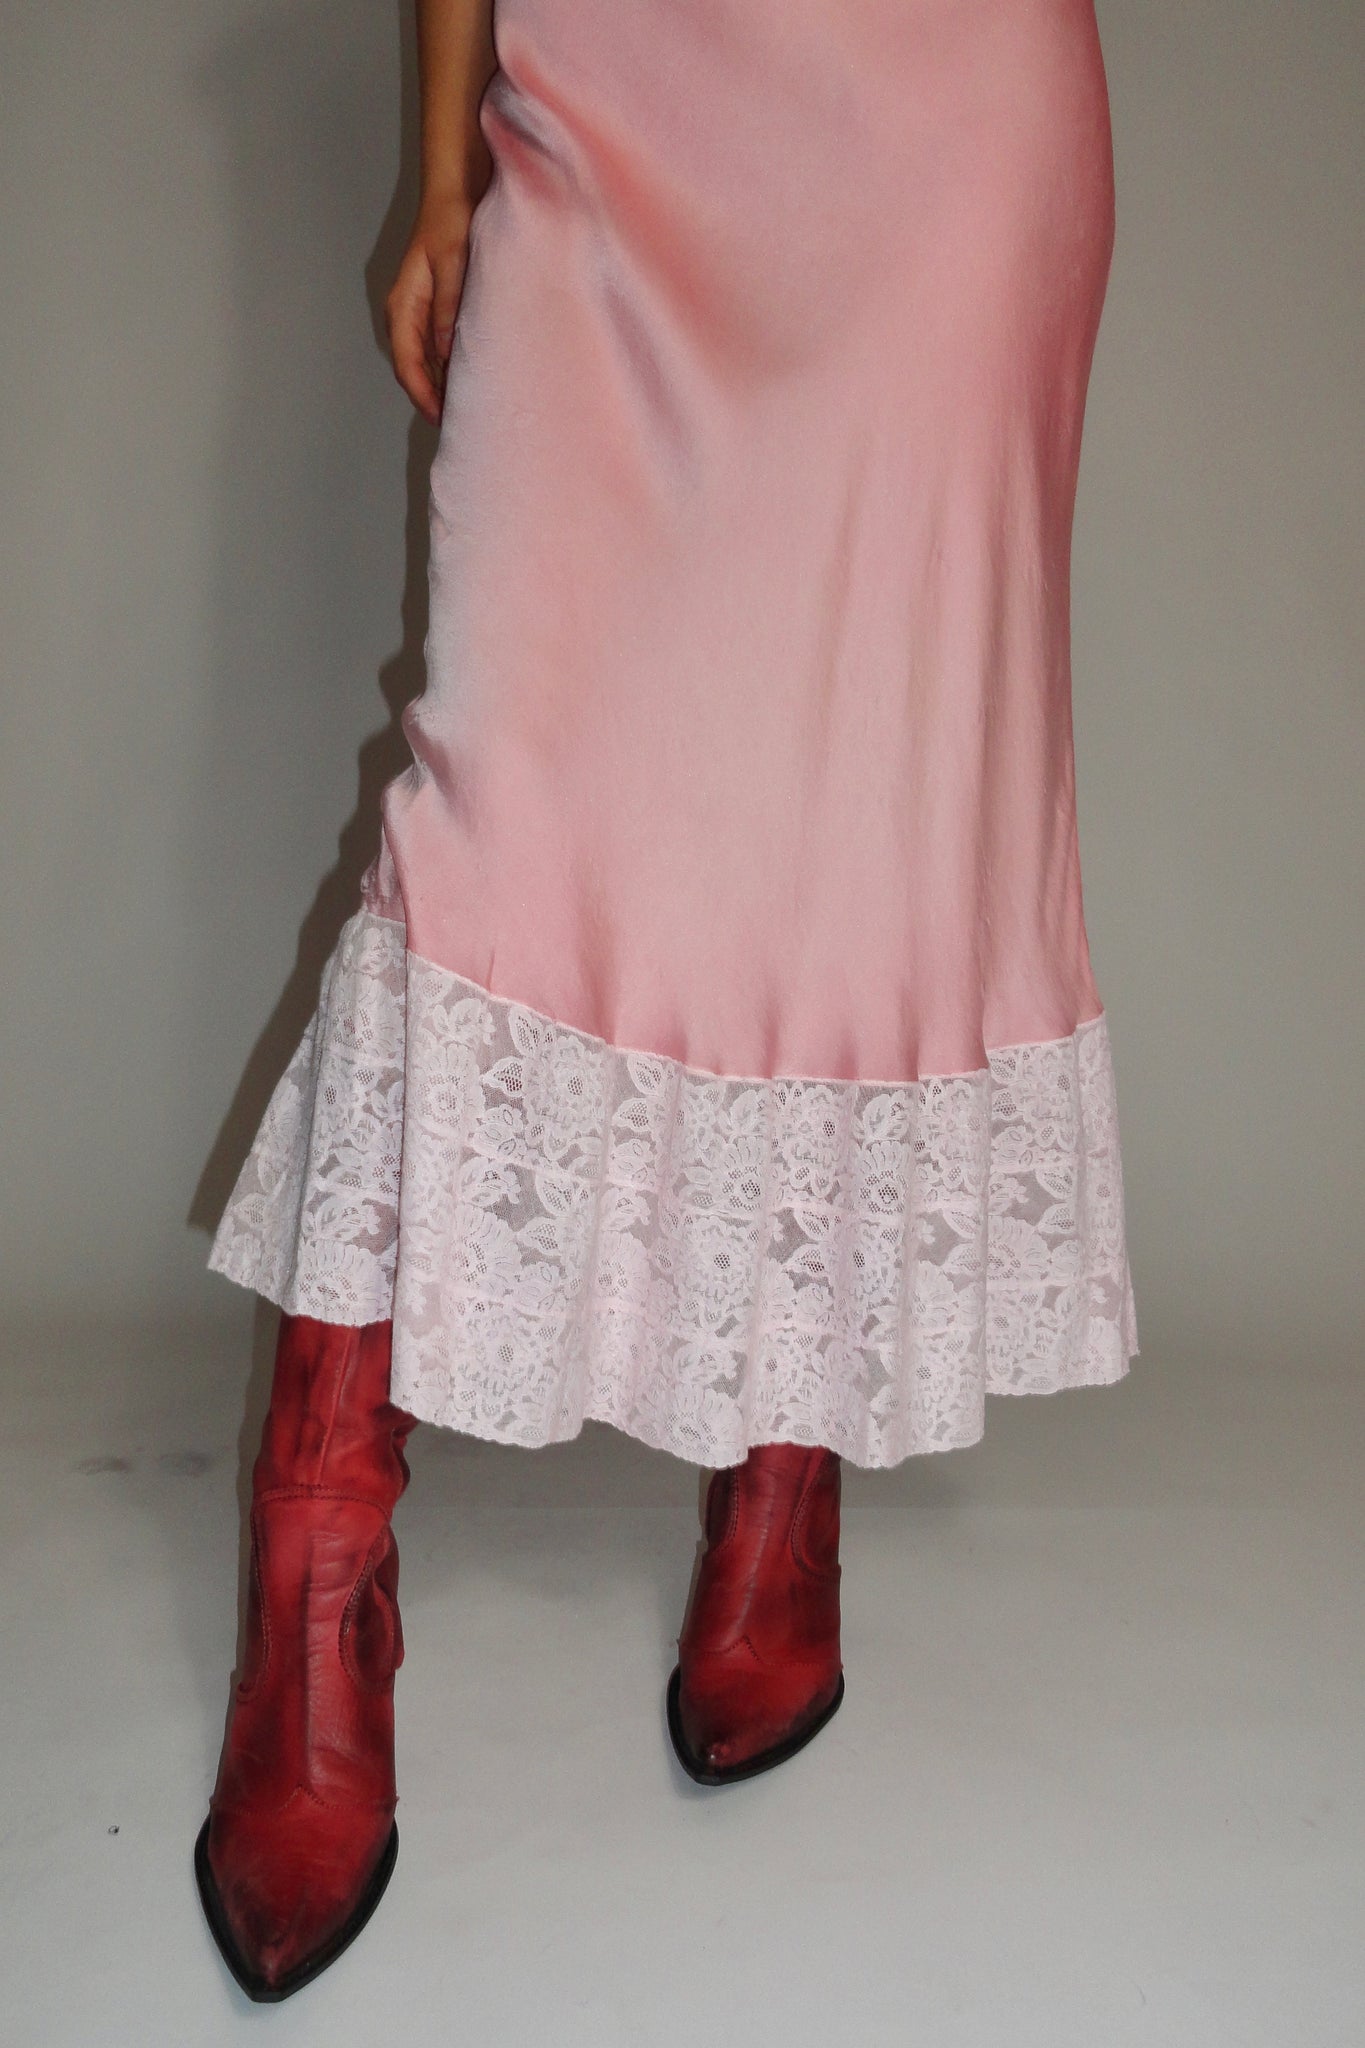 1930s Hand Dyed Pink Silk Satin Lace Nightgown